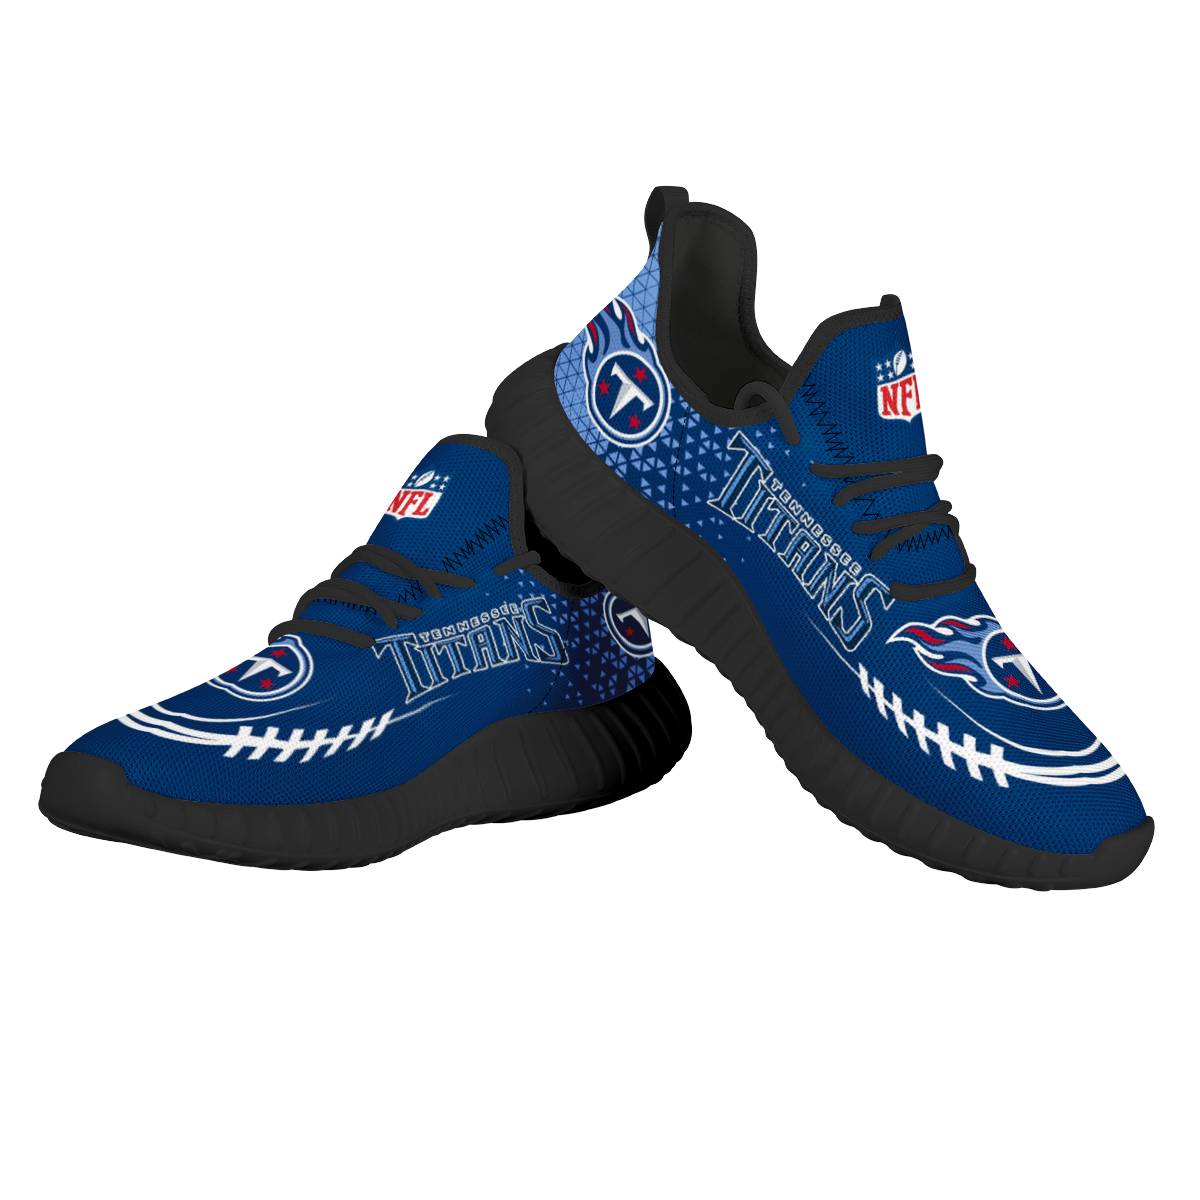 Women's NFL Tennessee Titans Mesh Knit Sneakers/Shoes 001